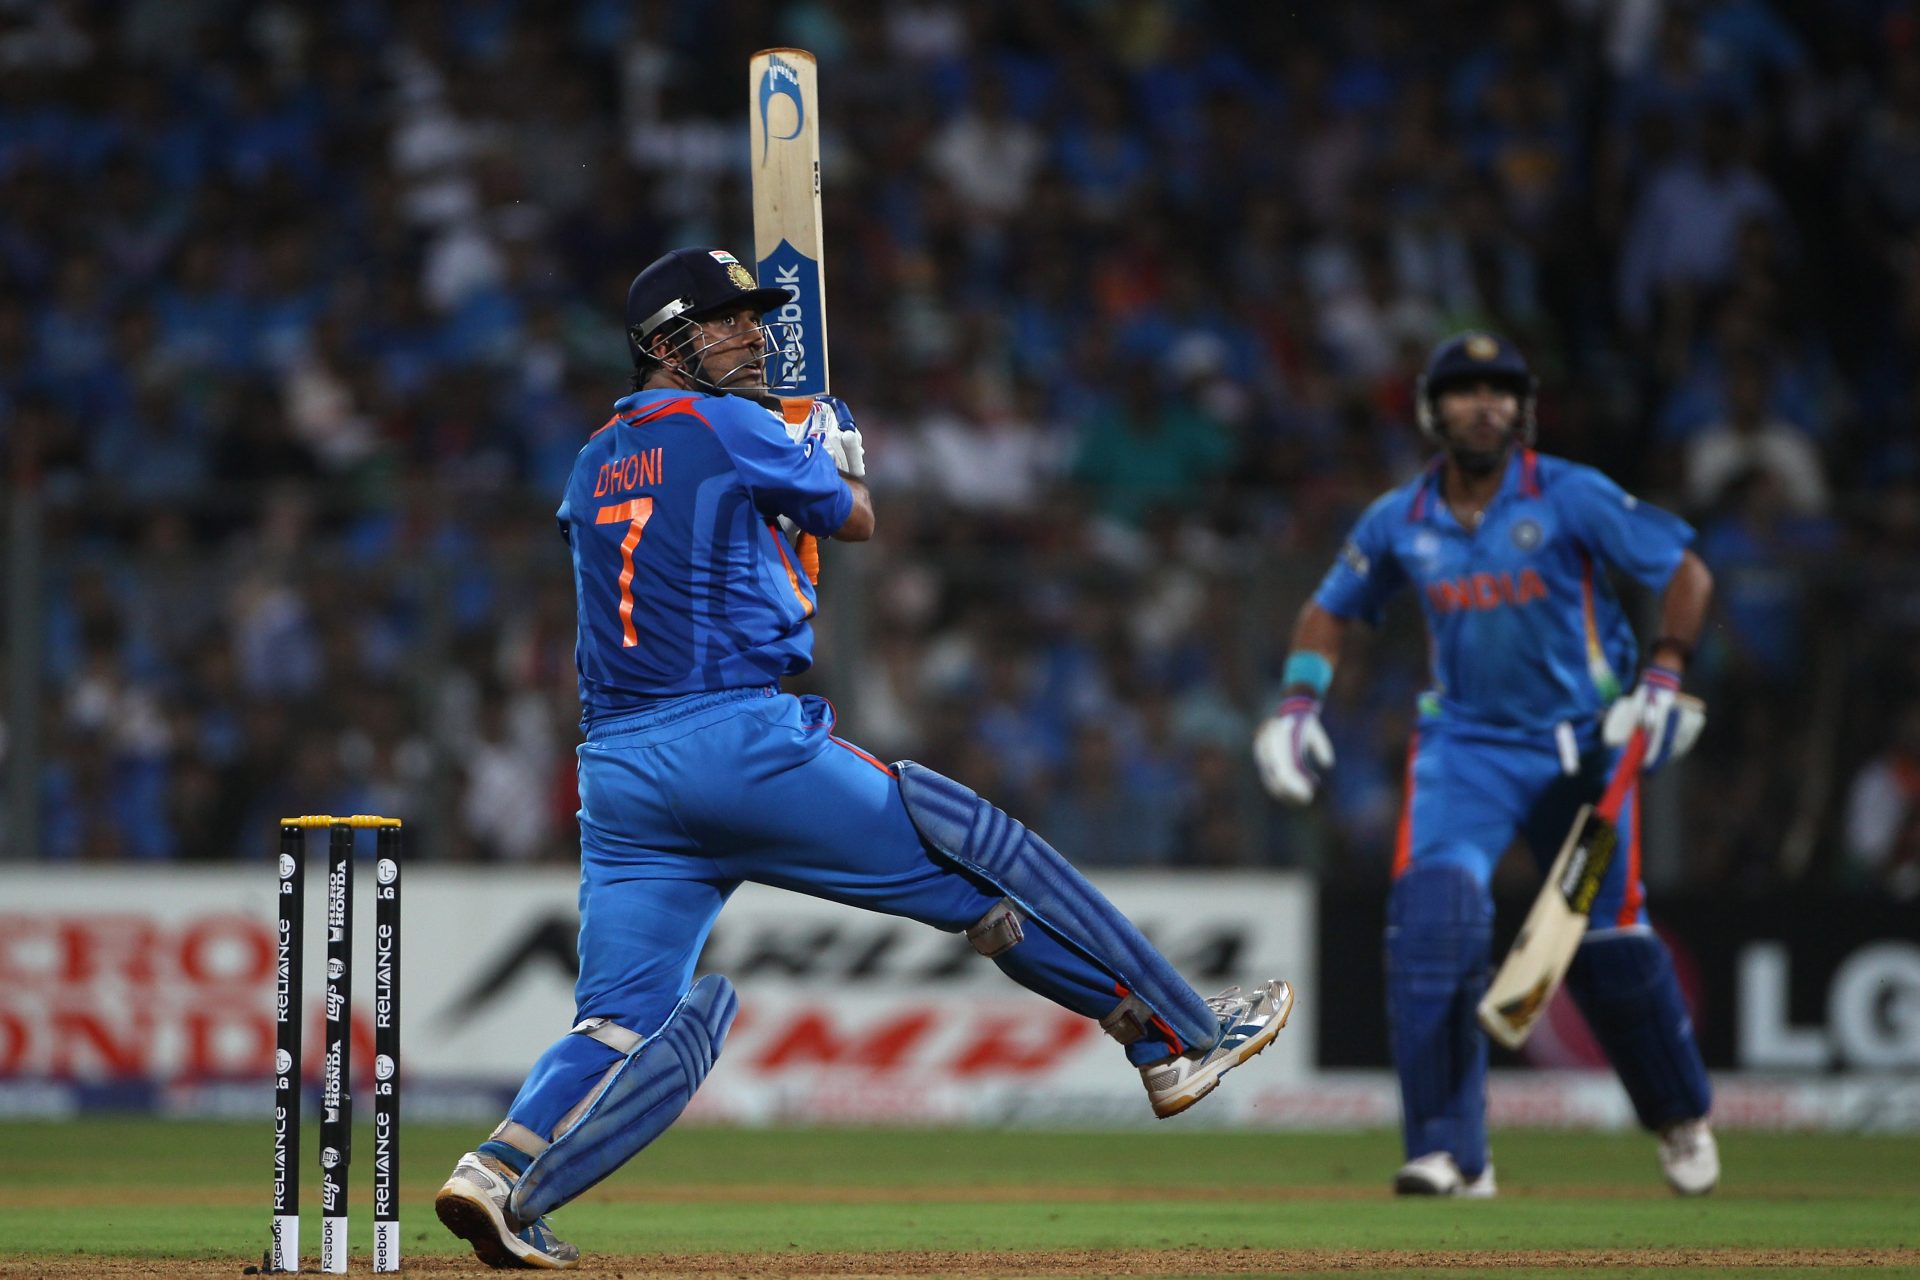 2: Dhoni wins it for India